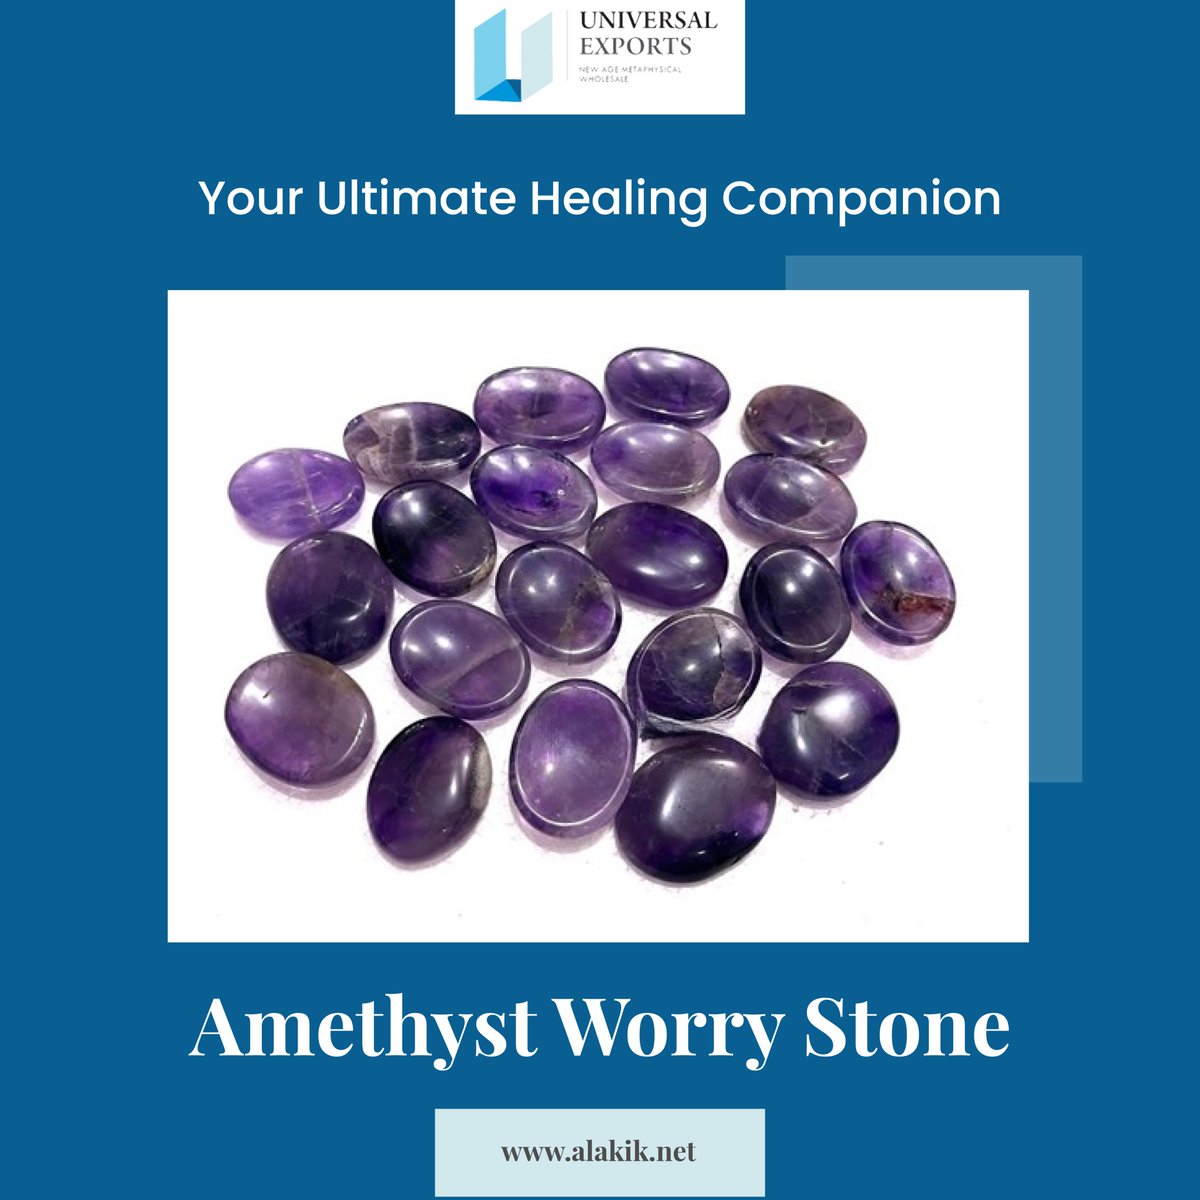 Amethyst holds transformative powers across physical, spiritual, and emotional realms, aiding in immune support, intuition enhancement, and emotional balance.

blog.alakik.net/amethyst-worry…

#worrystone #healingstone #healingcrystals #metaphysicalshop #metaphysicalstore #alakik #USA